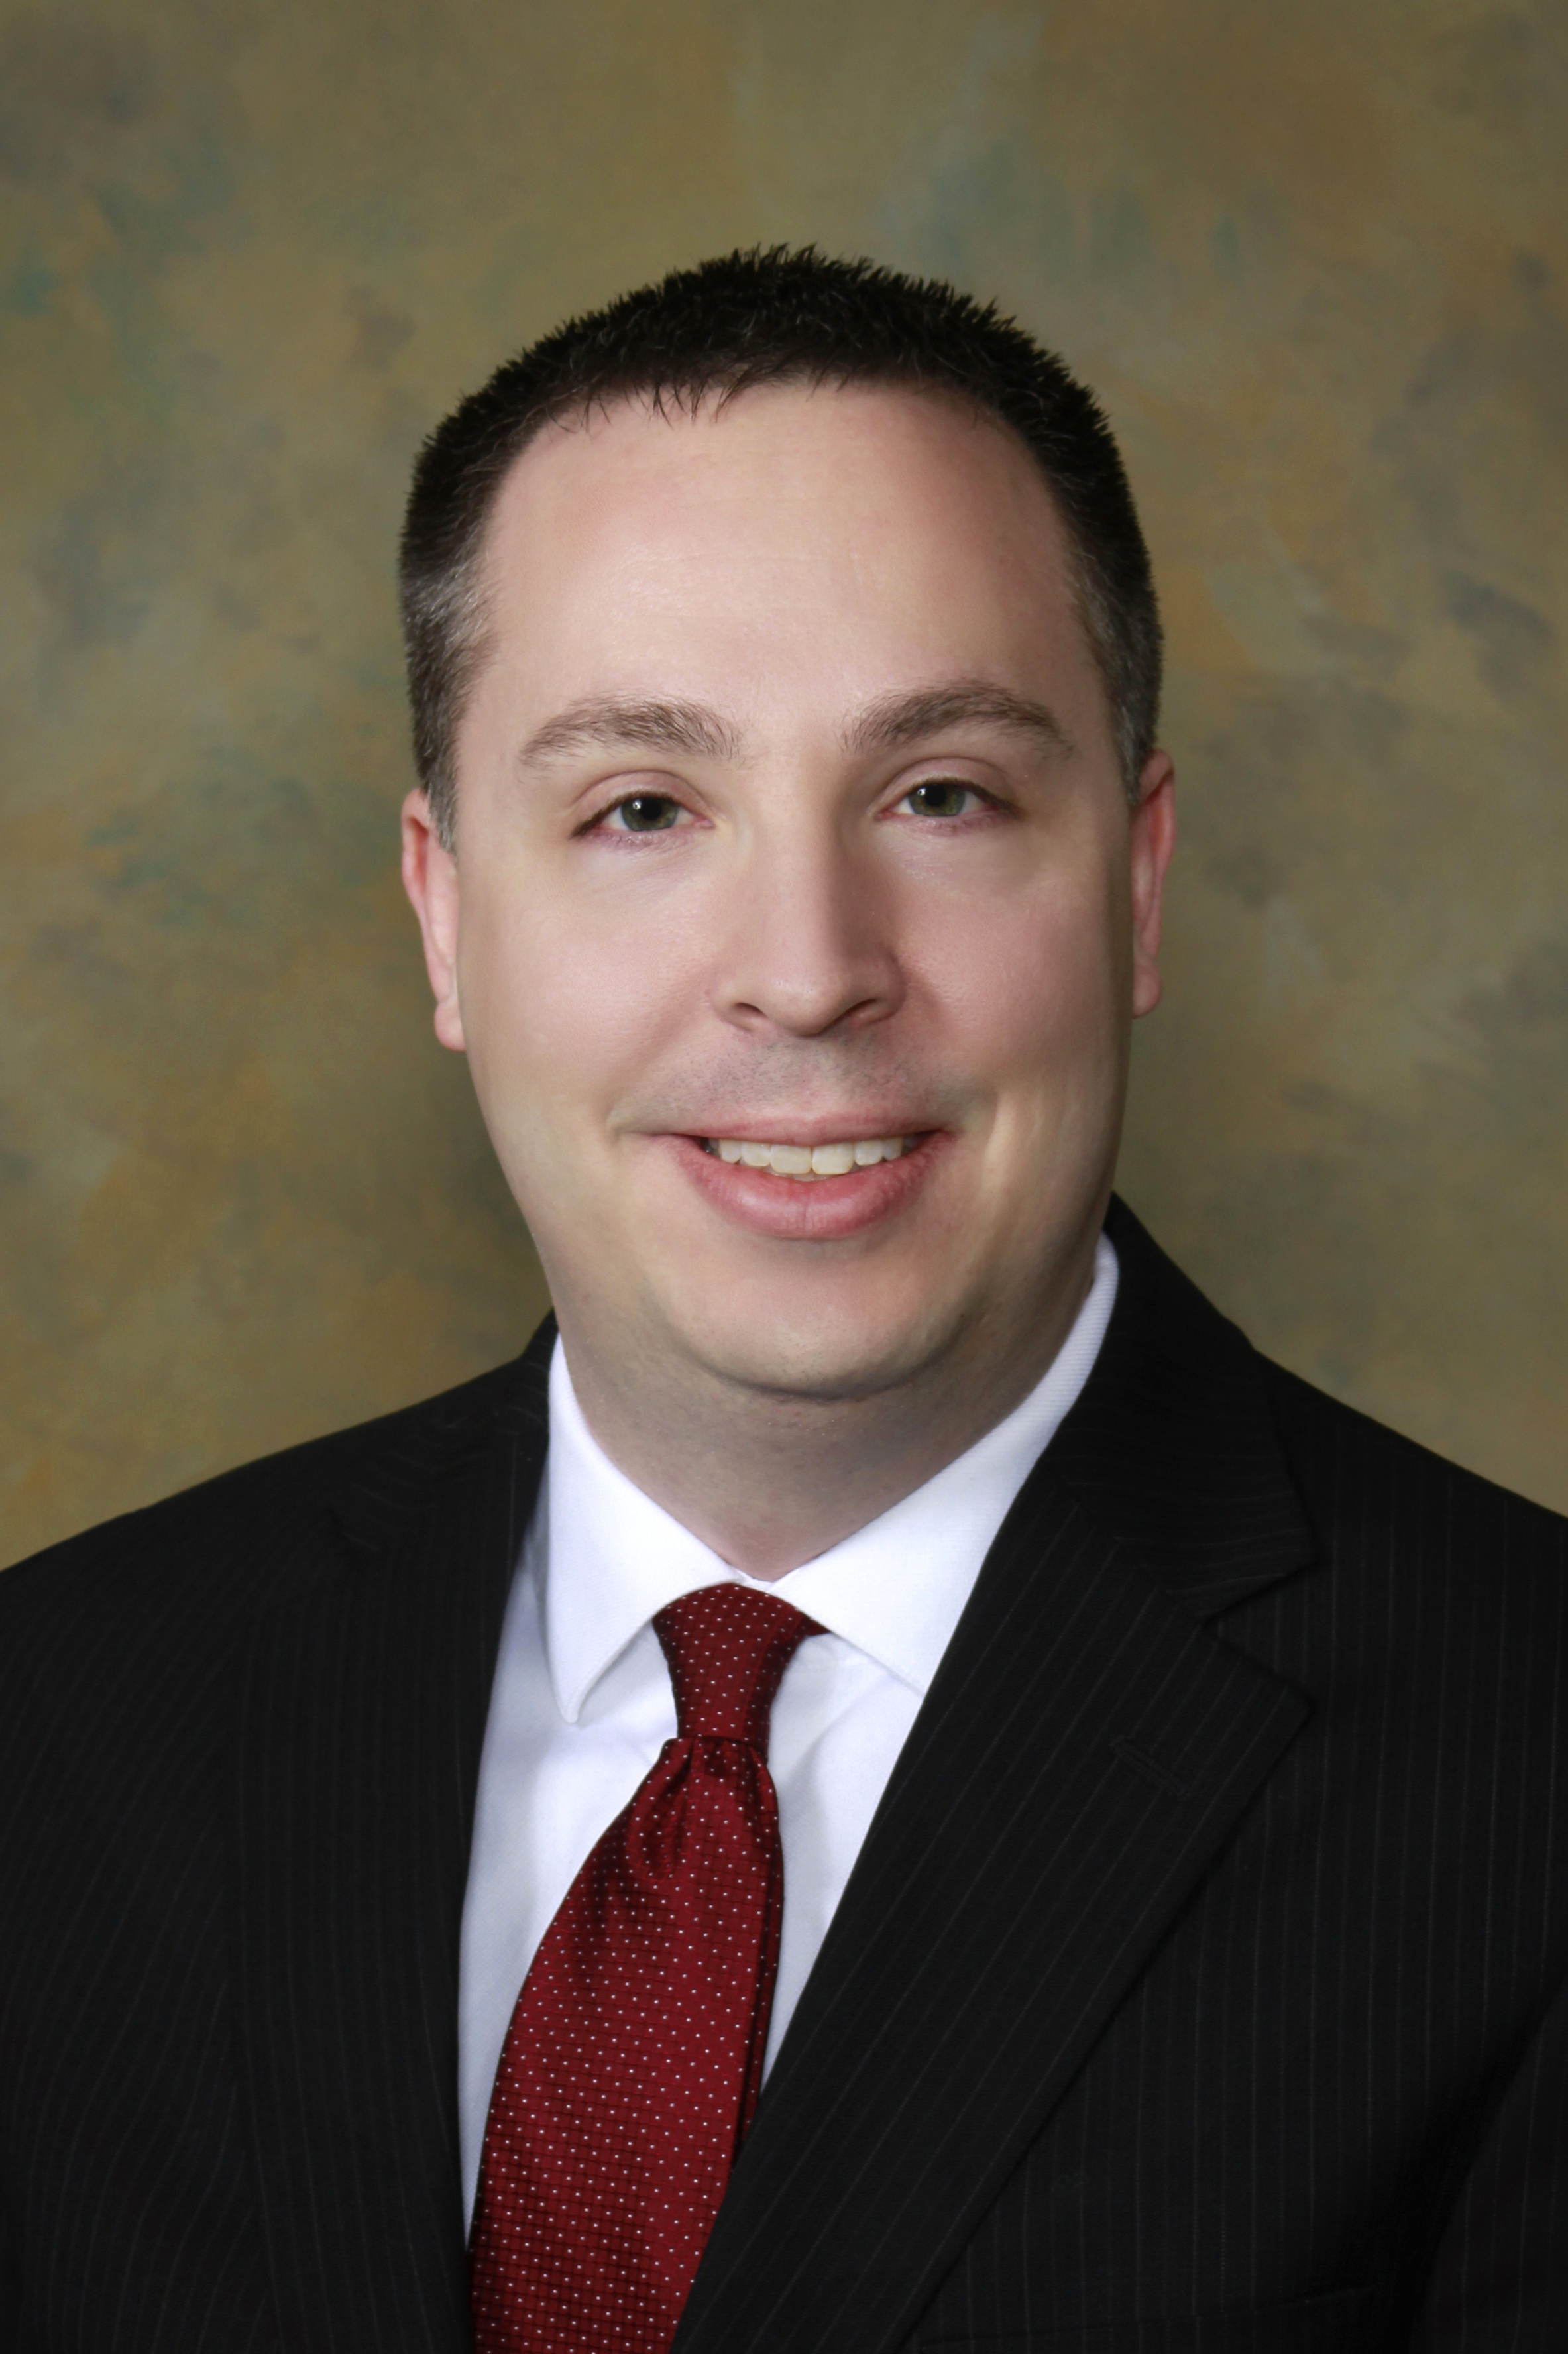 DUI Attorney Andrew Hoverman - Montgomery County, MD - DUIAttorney.com